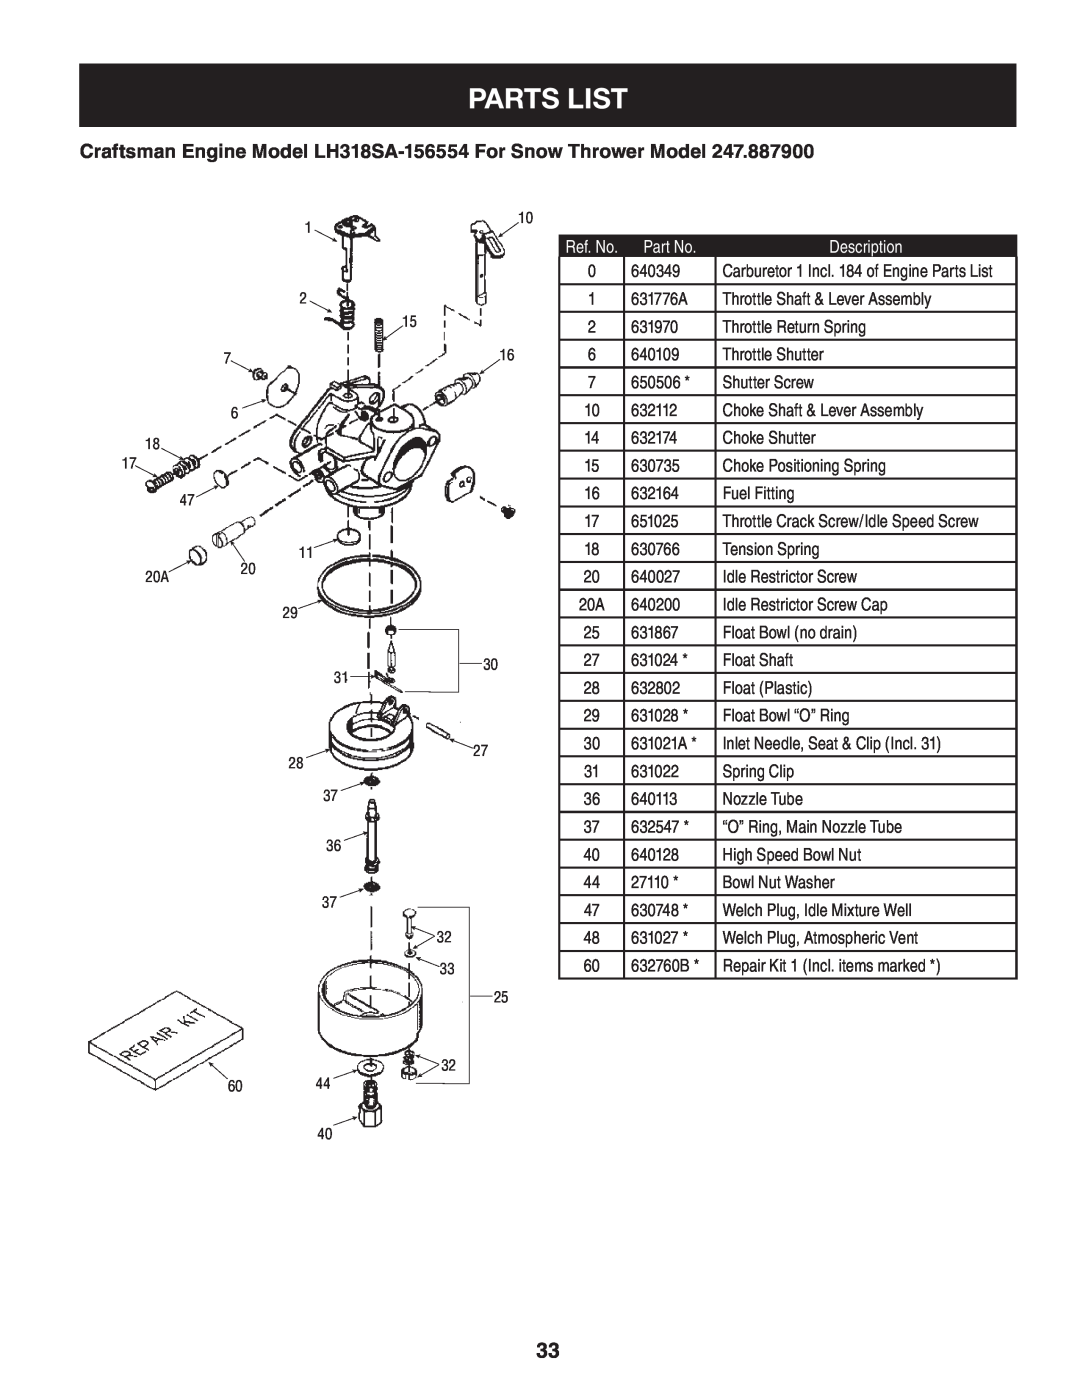 Sears 247.8879 operating instructions Parts List, Craftsman Engine Model LH318SA-156554 For Snow Thrower Model, Description 